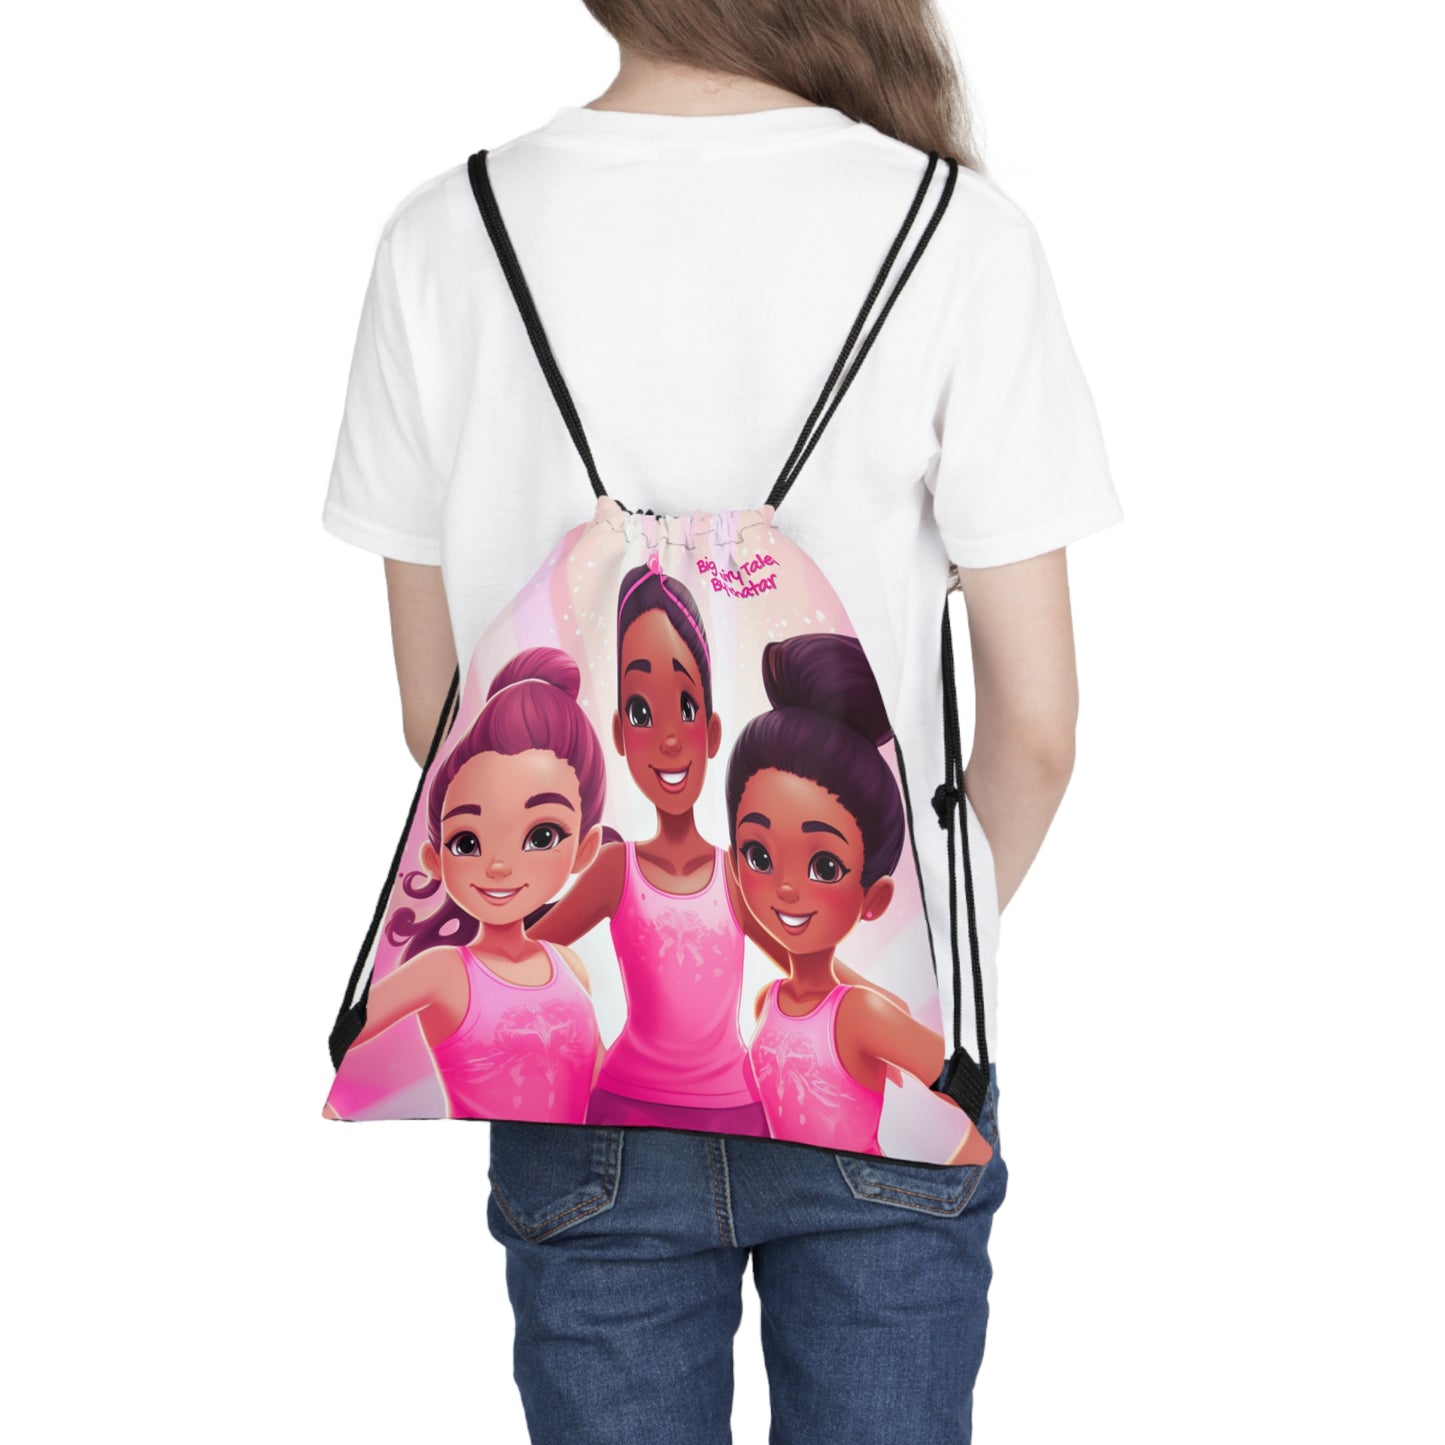 Fairy Tale Gymnast Tote From Big Fairy Tales By Schatar